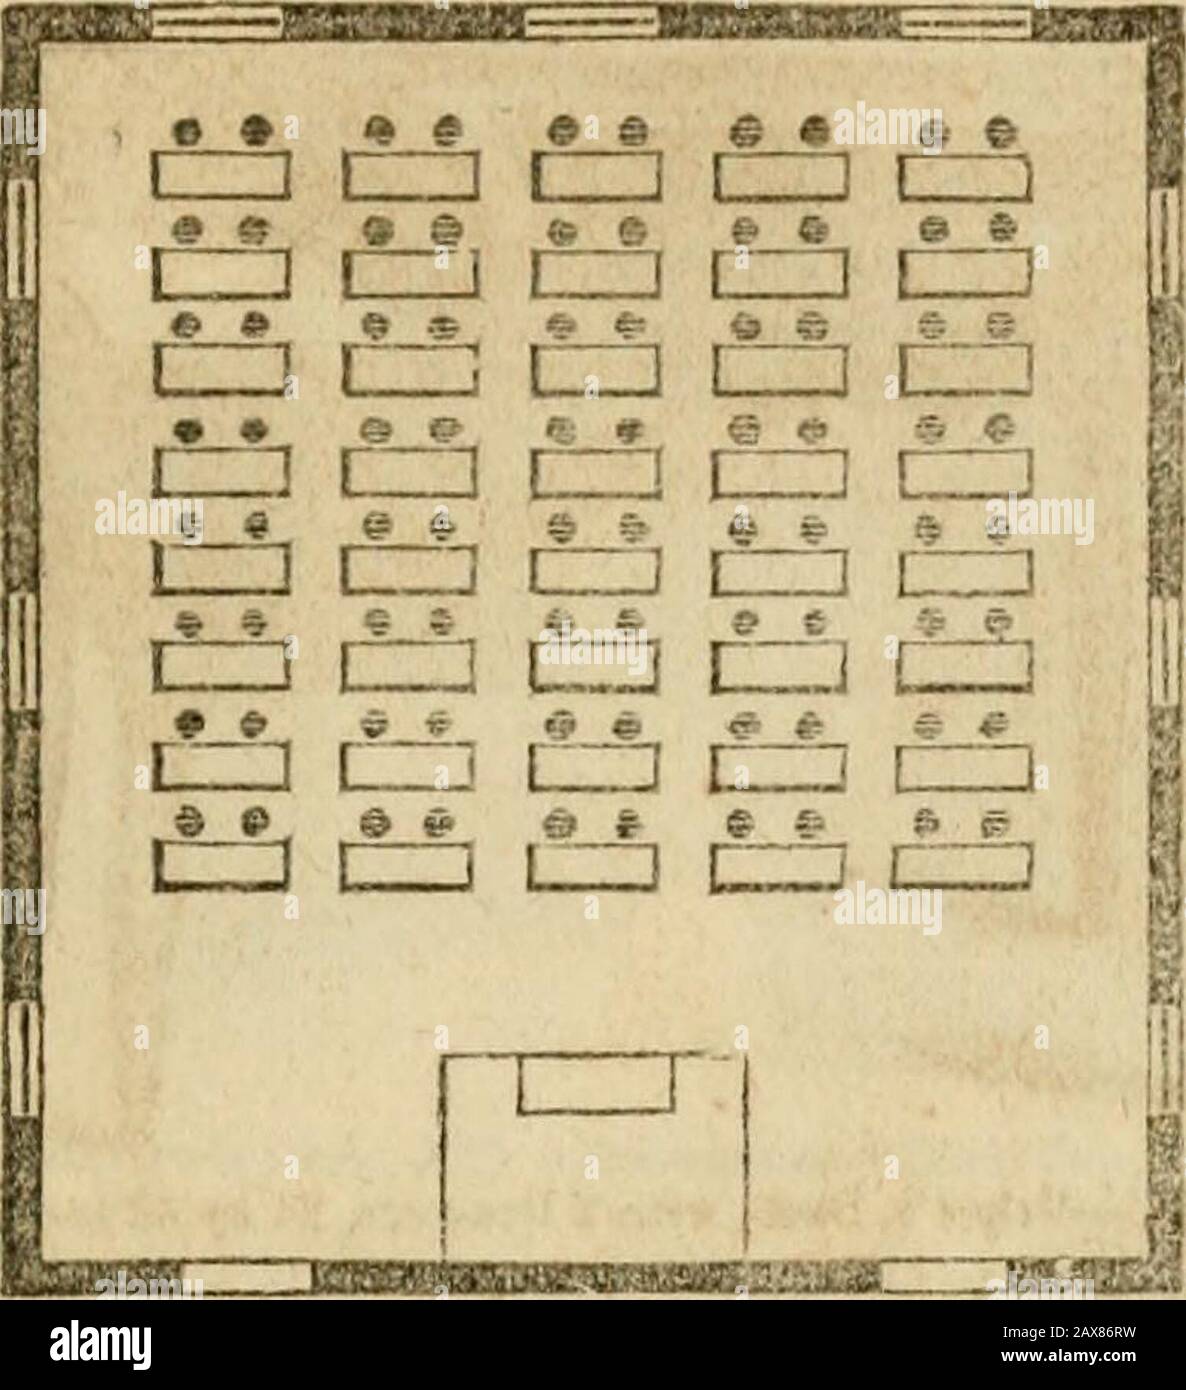 School funds and school laws of Michigan: with notes and forms . No. 11.—Double Desk with Falls and Chairs, 10 by 42 .^nd 20 by 4^ inch?. This arrangement allows a separate space for the booksand papers of each pupil, while both use a common Ink-well. These Chairs, like those represented in Nos. 9 and10, are furnished with a strong back brace, which adds totheir strength, though not to beauty. SCHOOL FURNITURE. 393. The above plan represents a Schoal-room 32 by 35 feet,with double Desk?t, 15 by 42 inches; outside aisles 3 feet,and interniediate aisles 1 foot 3 inches wide. A room ofthis size w Stock Photo